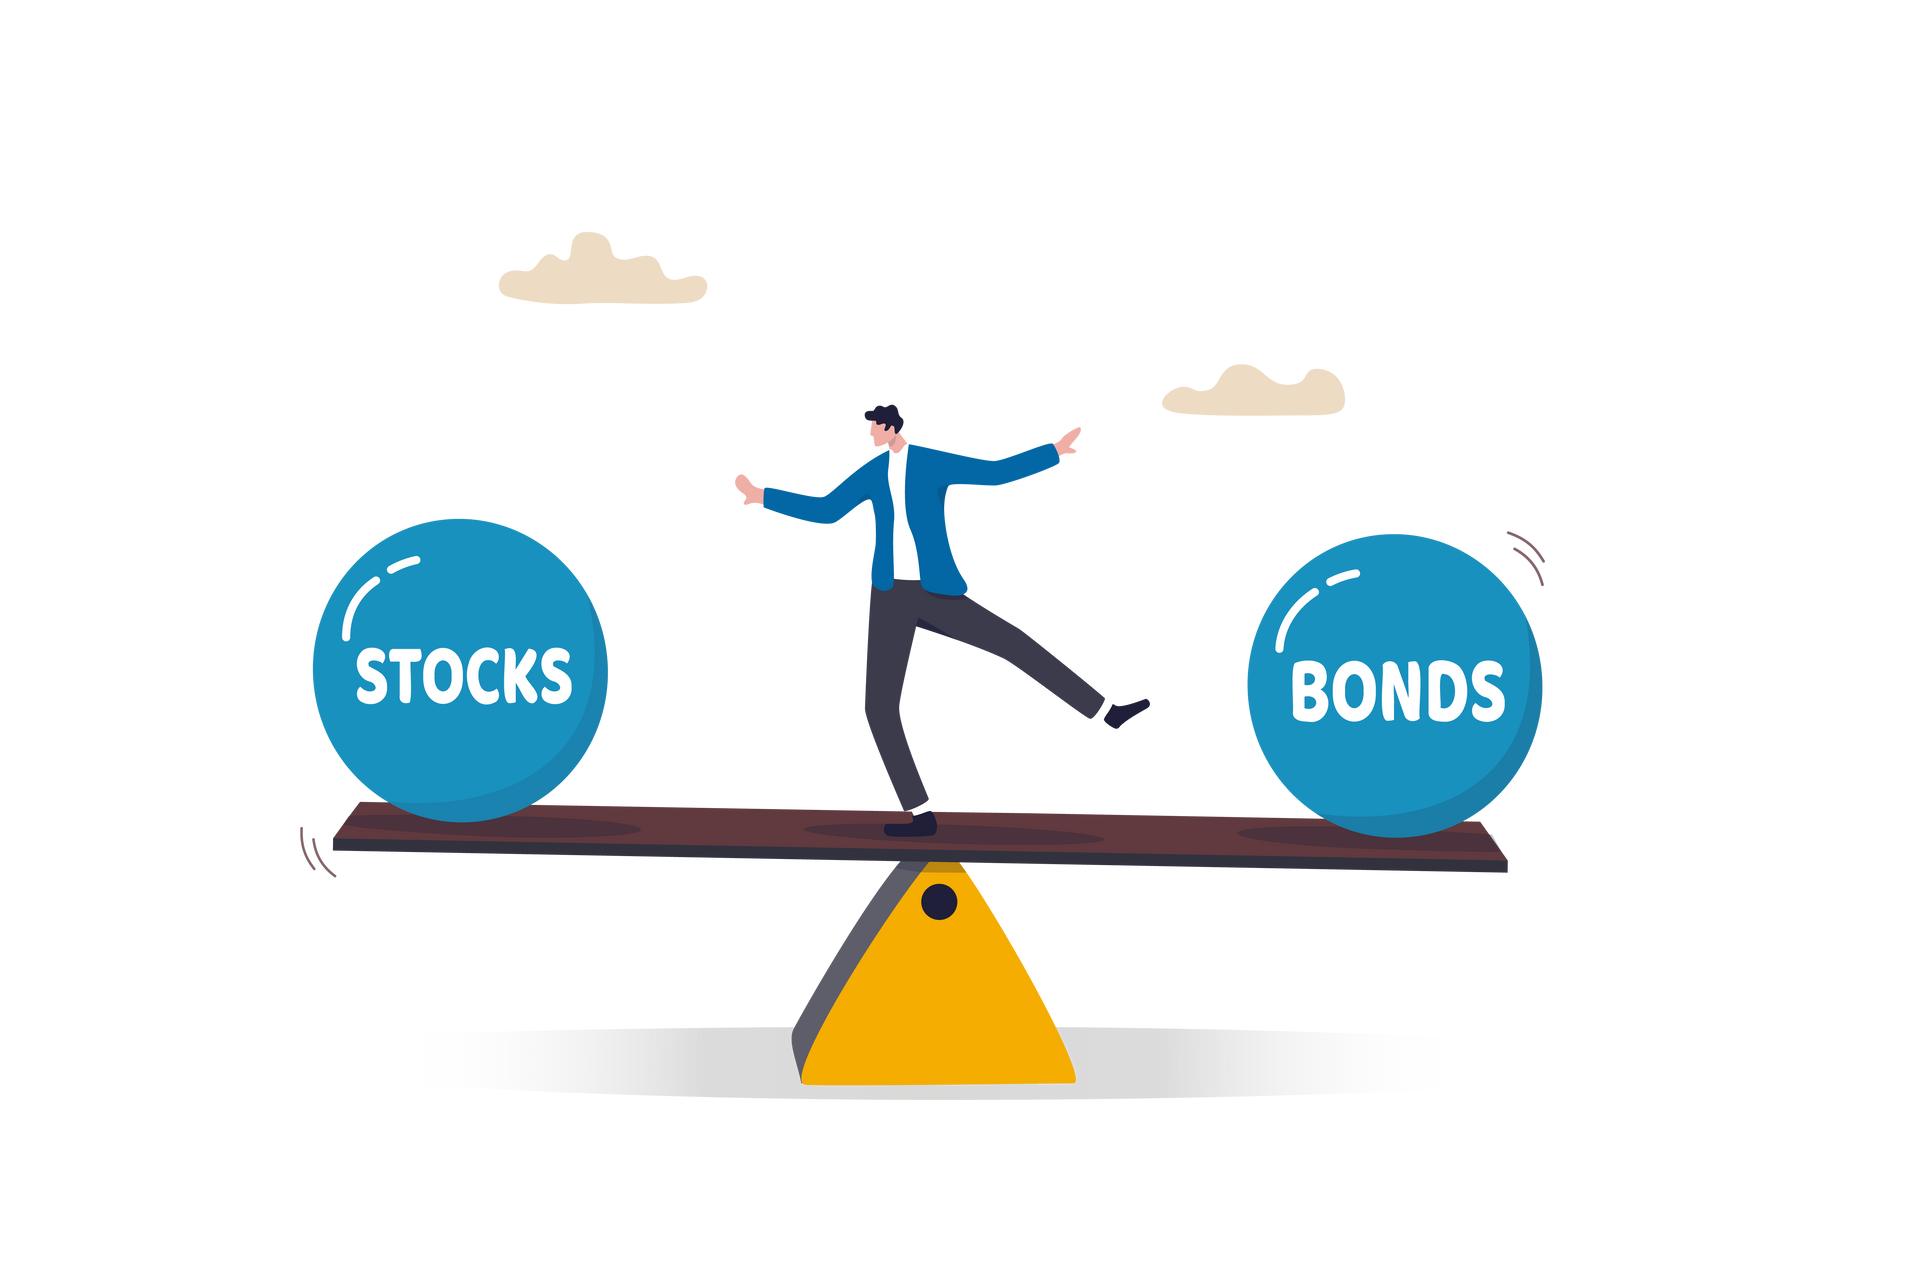 A man is balancing stocks and bonds on a seesaw.